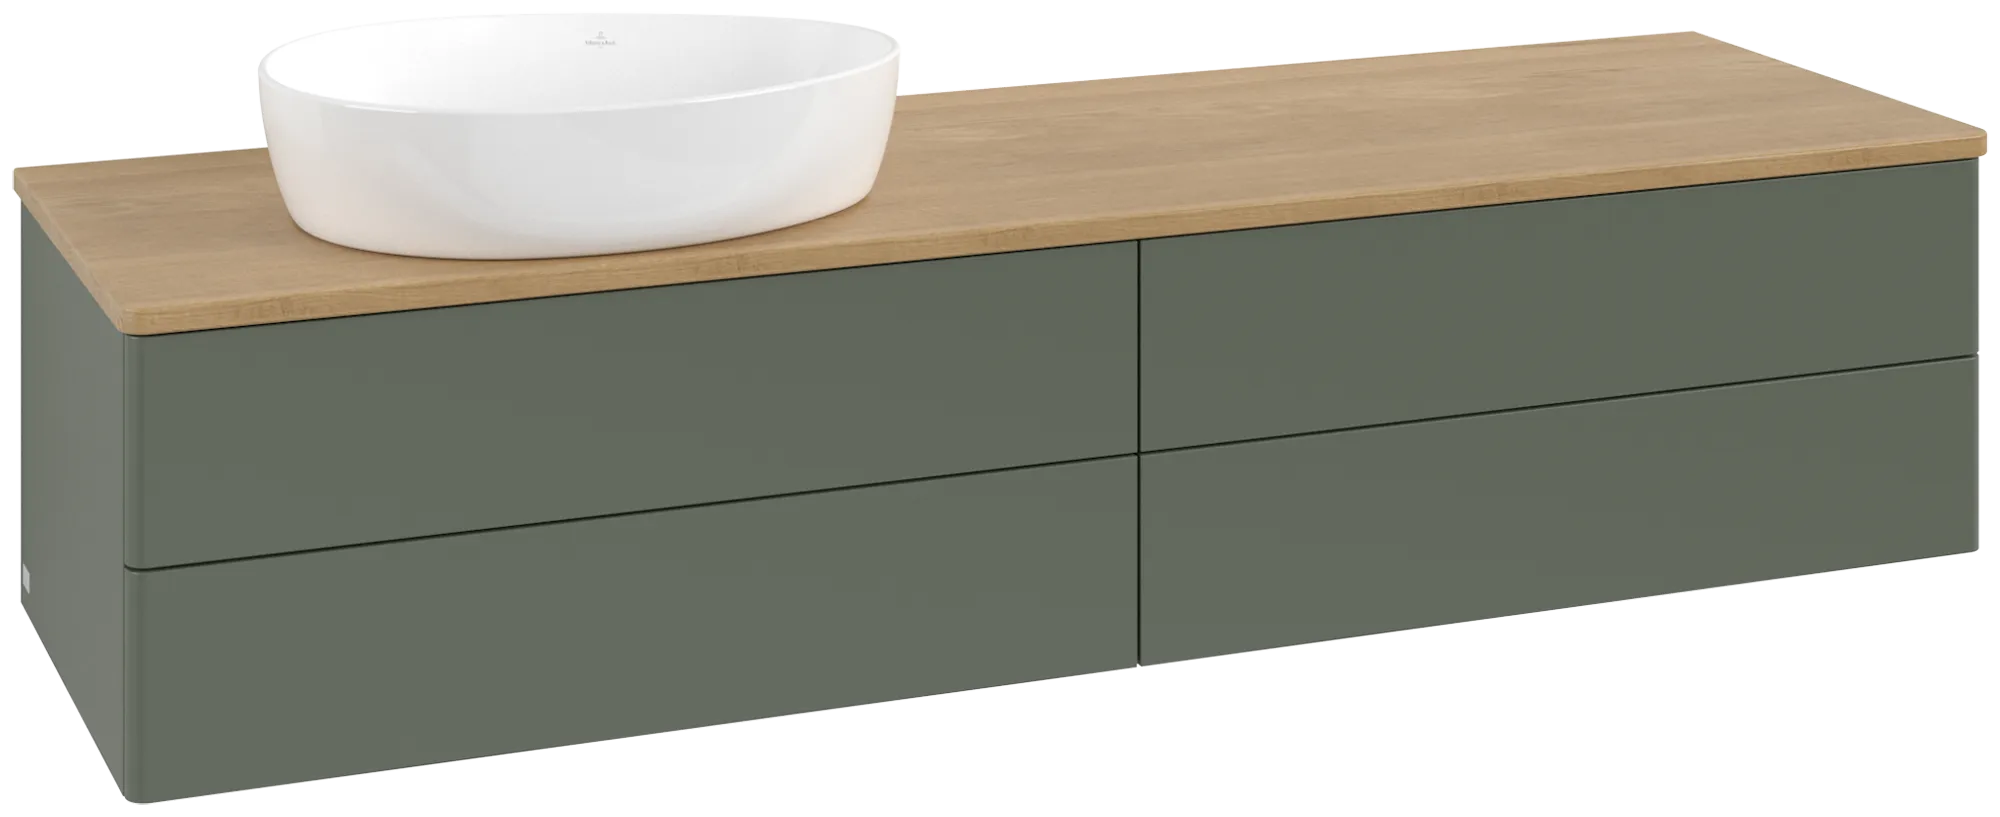 Picture of VILLEROY BOCH Antao Vanity unit, with lighting, 4 pull-out compartments, 1600 x 360 x 500 mm, Front without structure, Leaf Green Matt Lacquer / Honey Oak #L26011HL